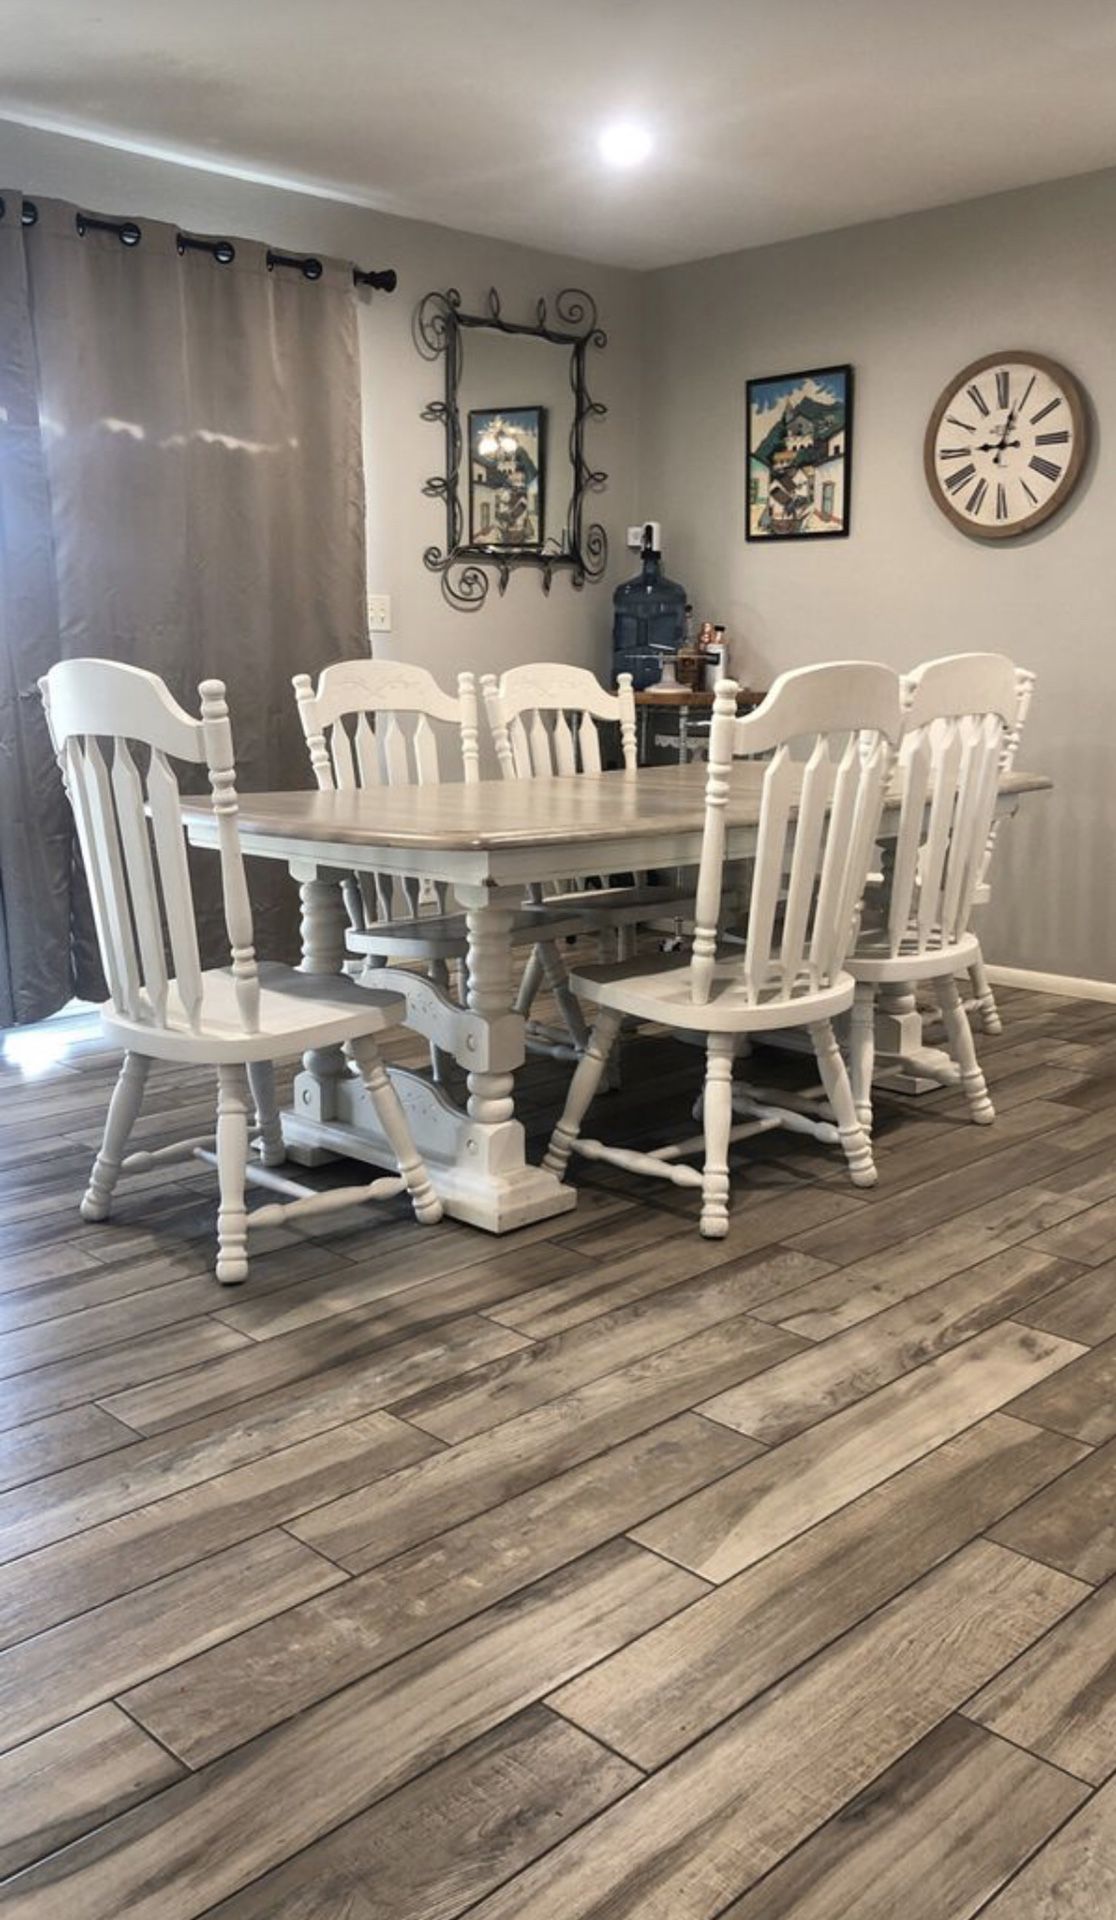 Farm / Country style kitchen table